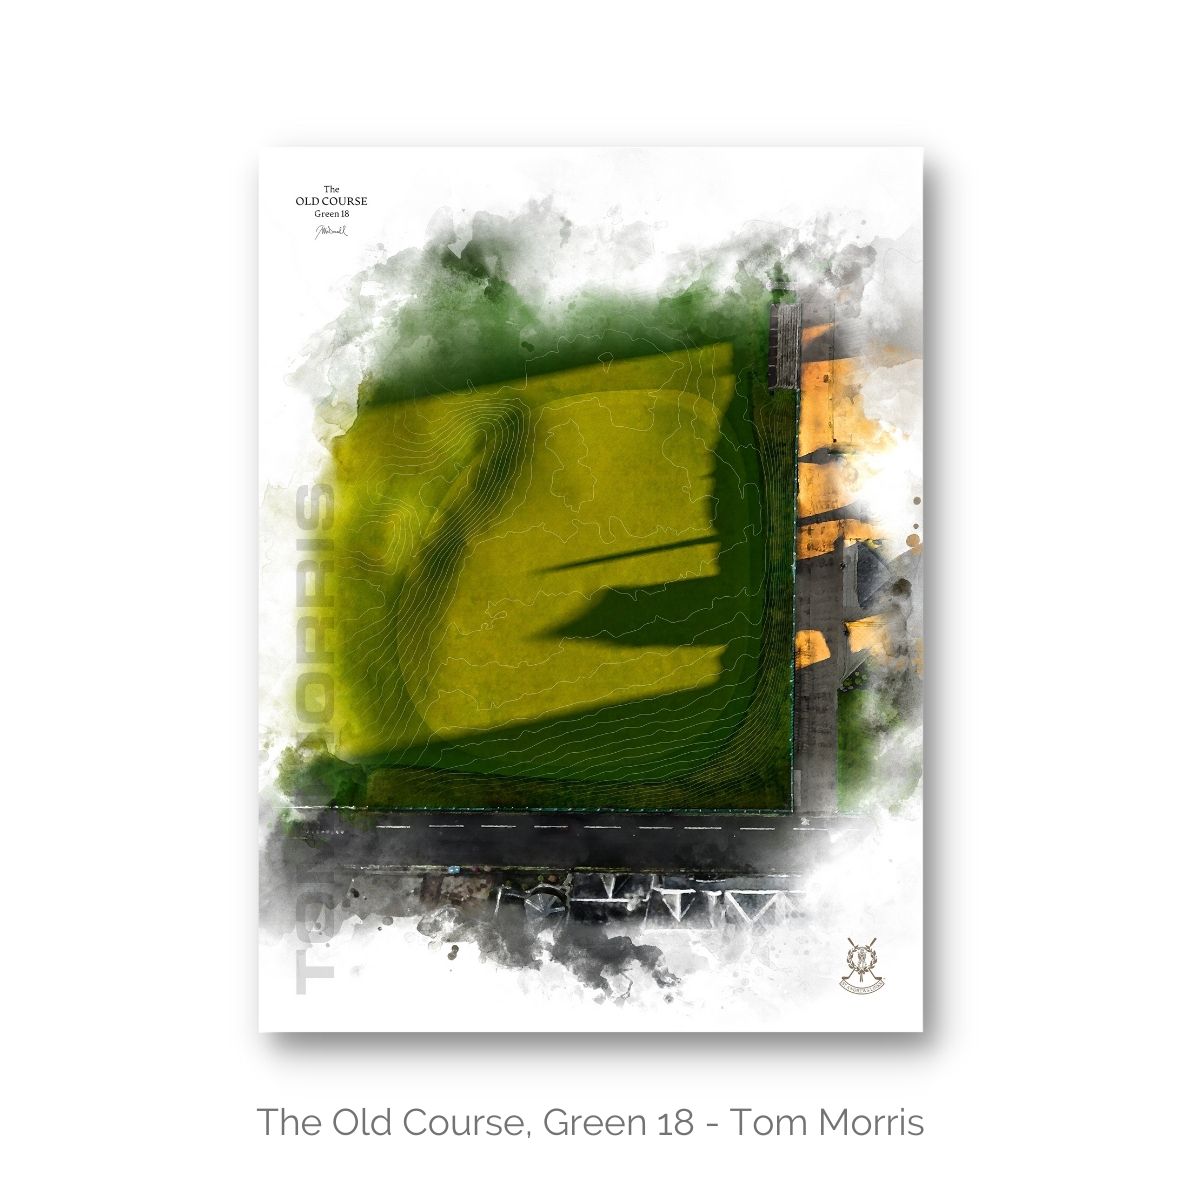 The Old Course Green 18, Tom Morris Print by Joe McDonnell